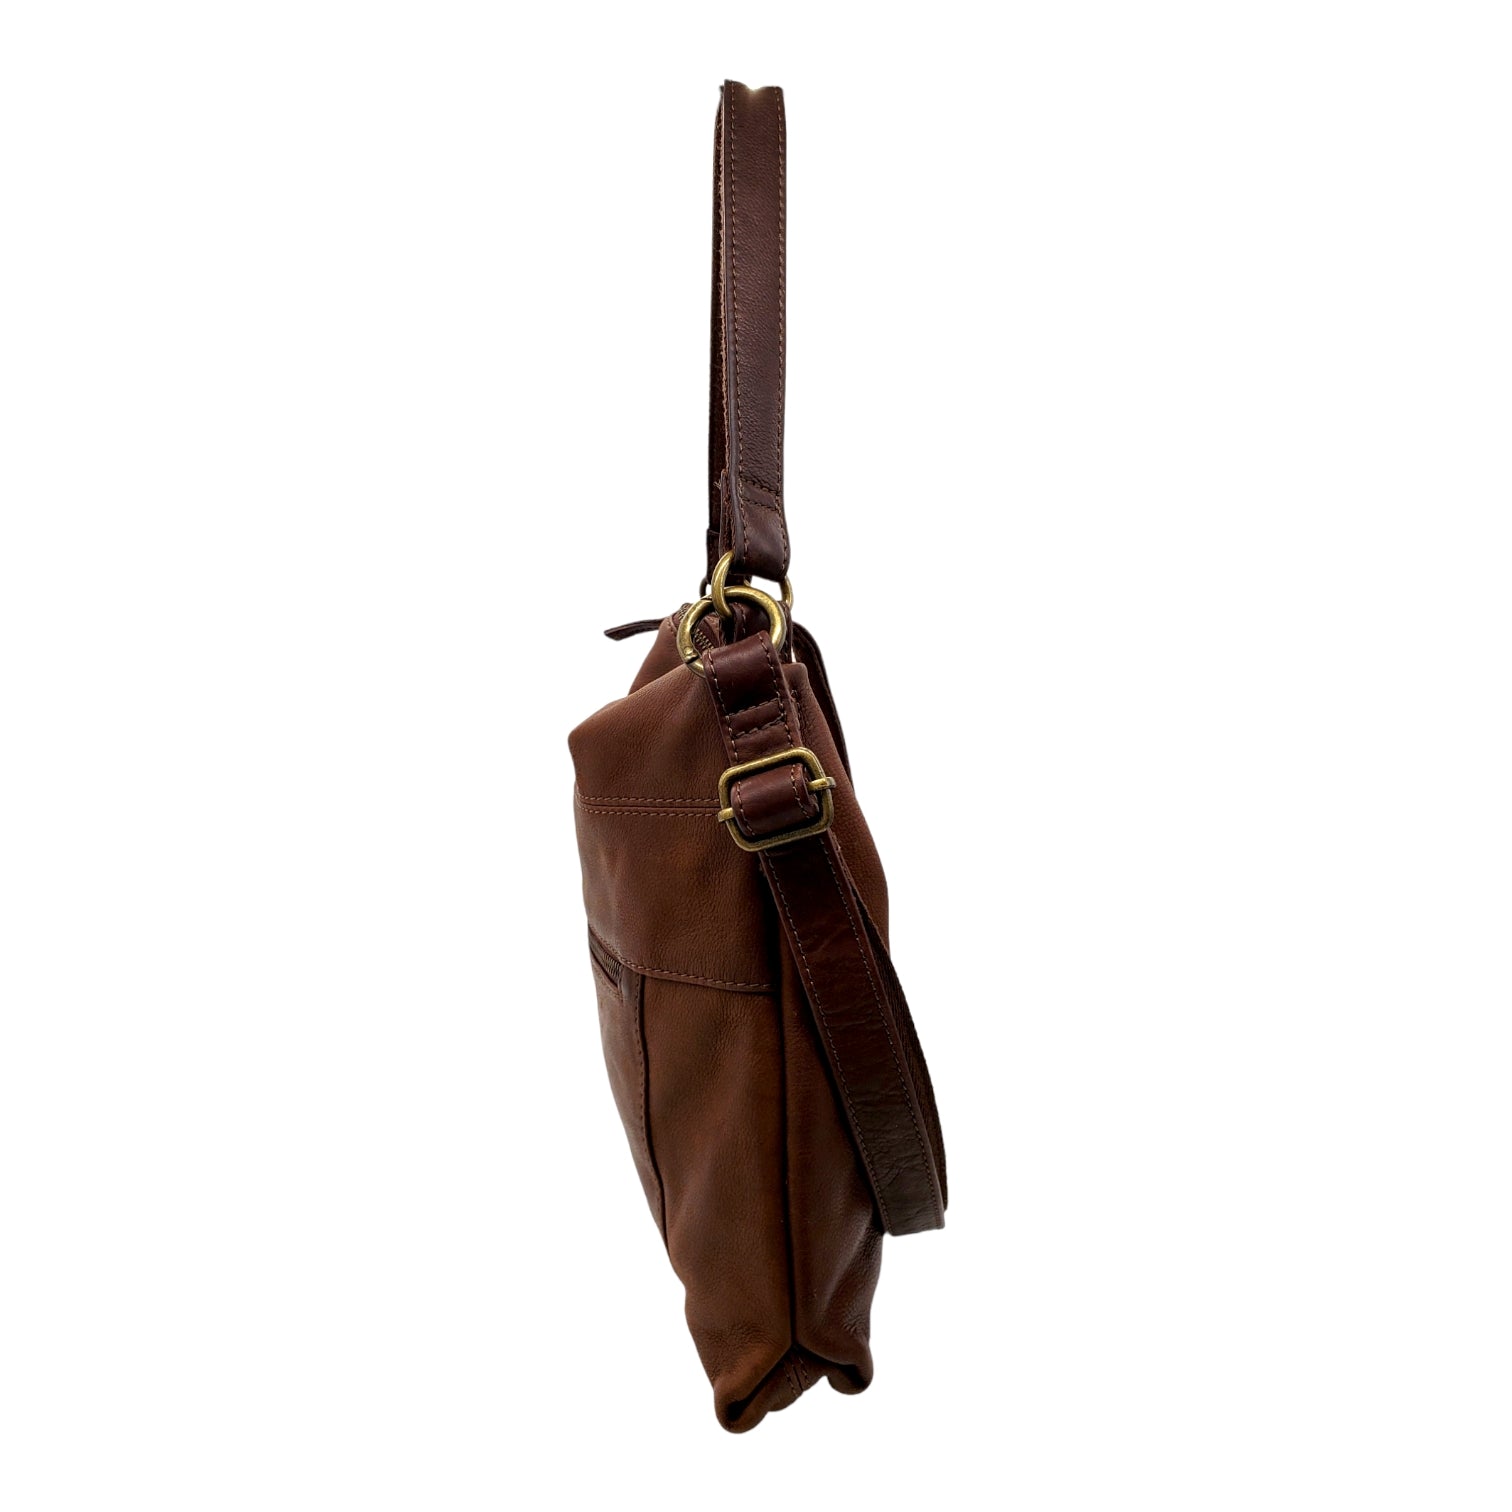 FatFace Brown Leather Cross Body/Shoulder Bag